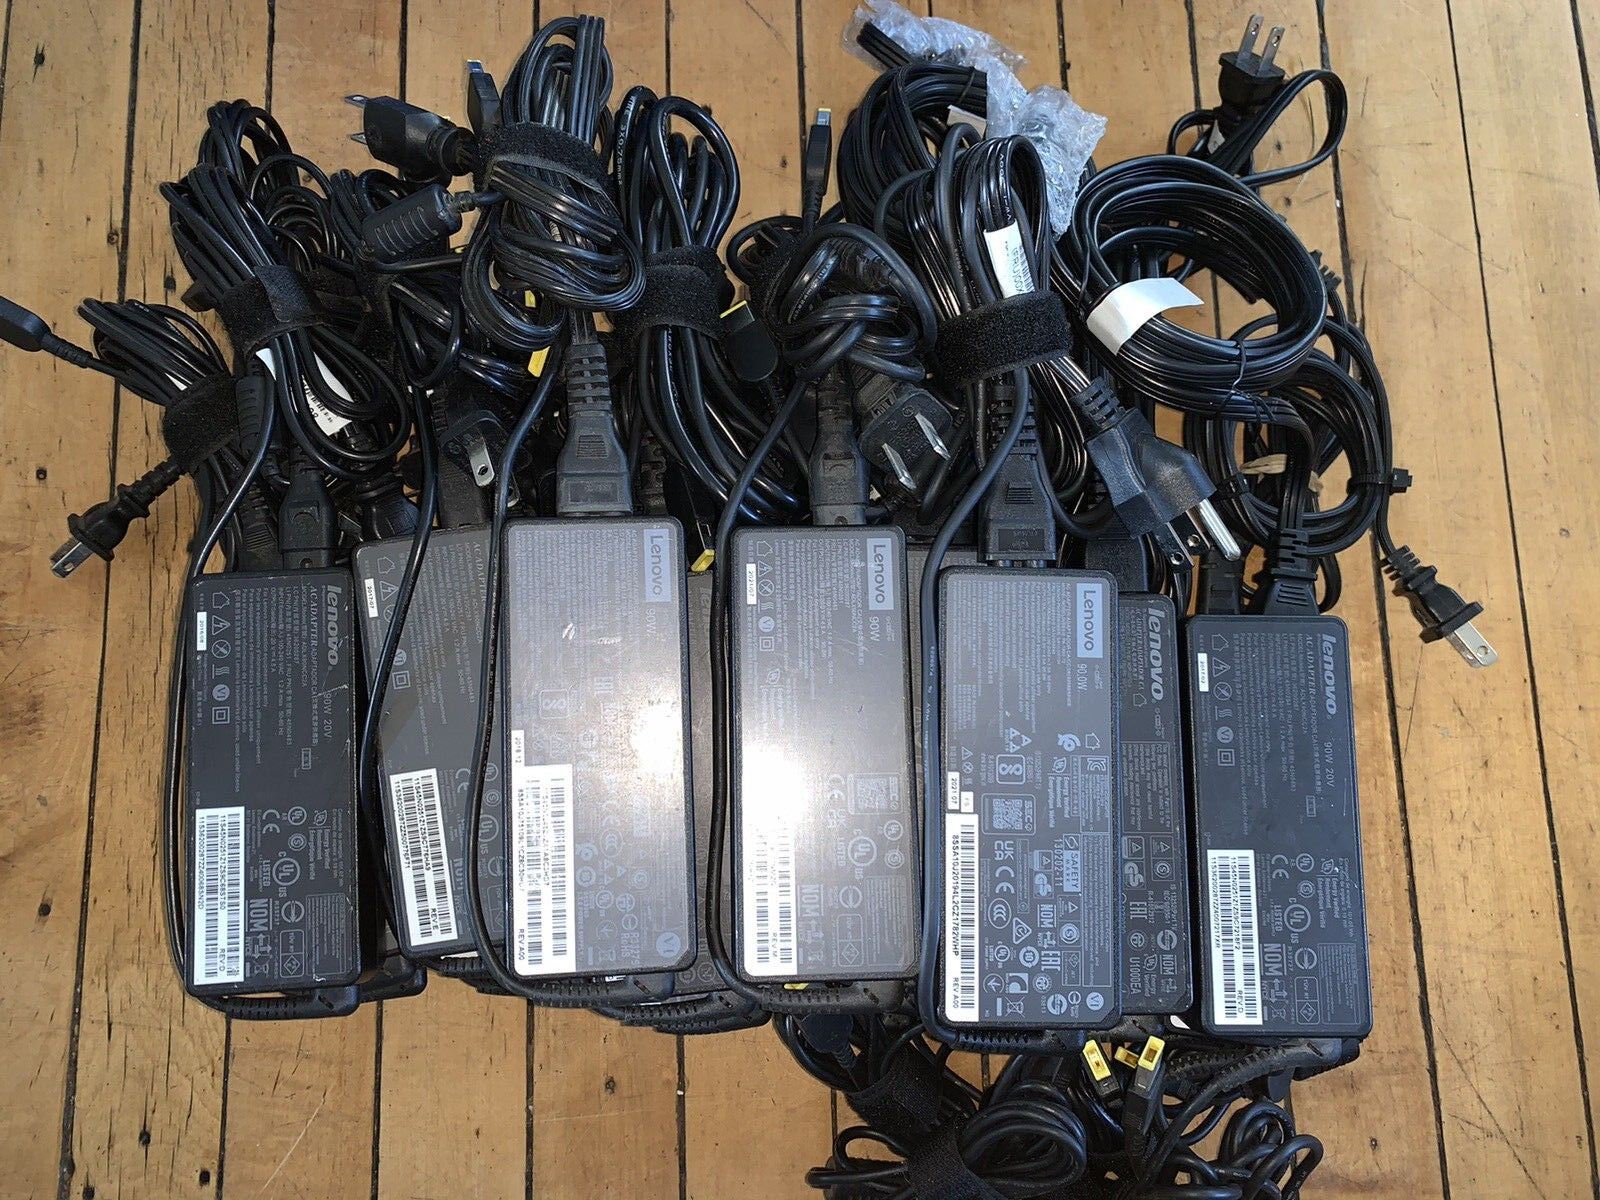 Lot of 27 OEM Lenovo 90W Yellow Square Tip Adapter Laptop Charger TESTED / GOOD